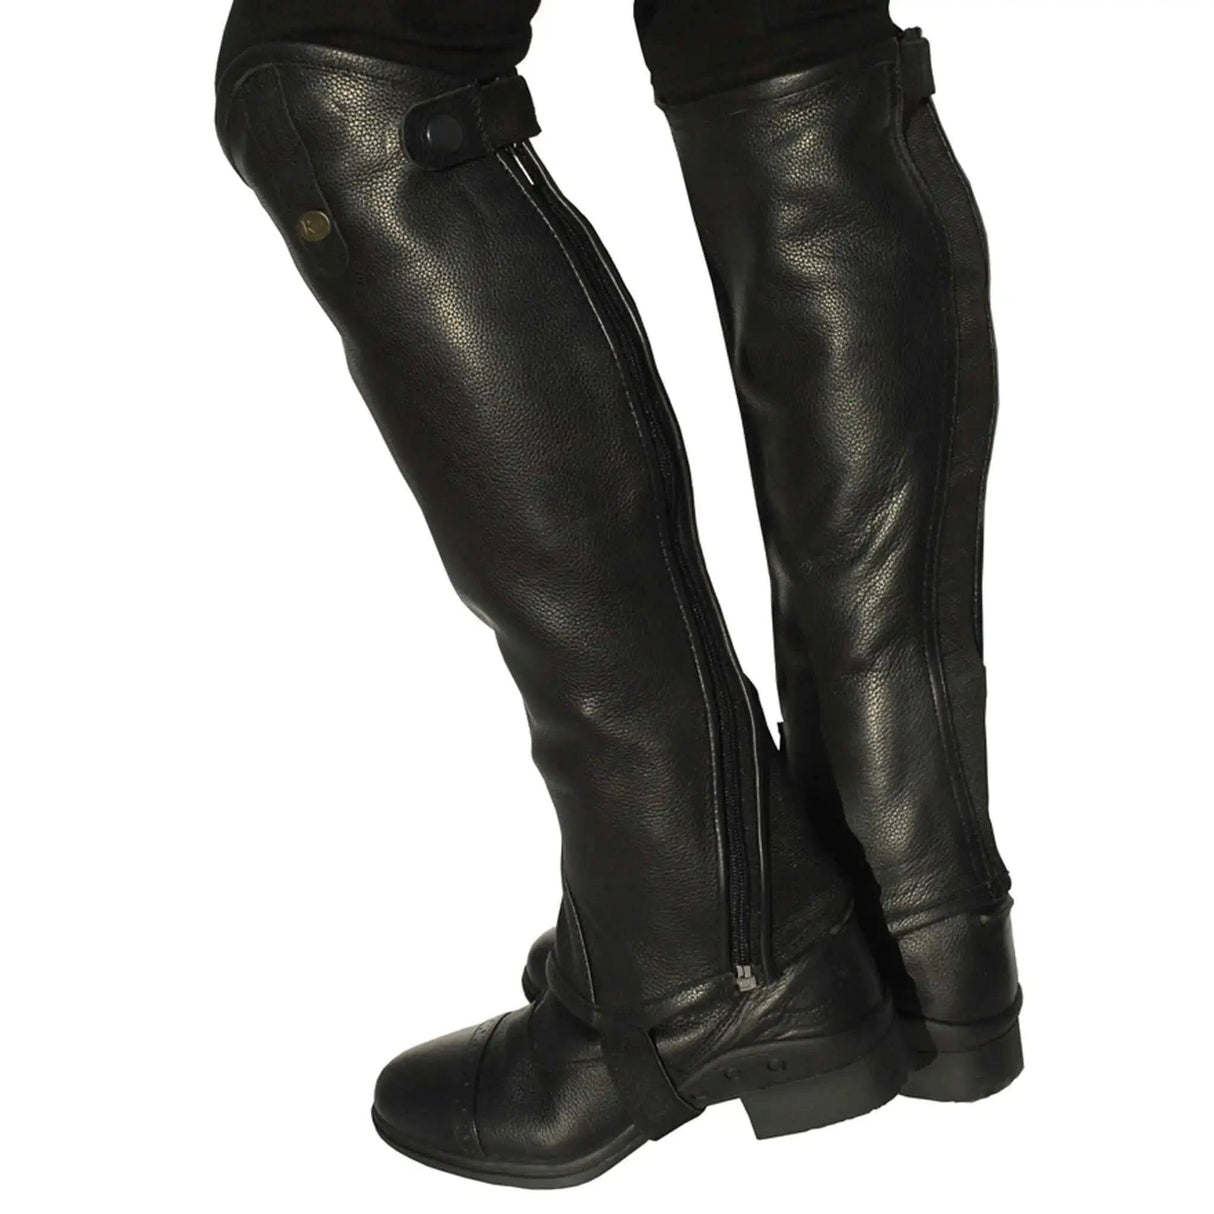 Rhinegold Elite Curved Zip Leather Gaiters Black Large Rhinegold Chaps & Gaiters Barnstaple Equestrian Supplies